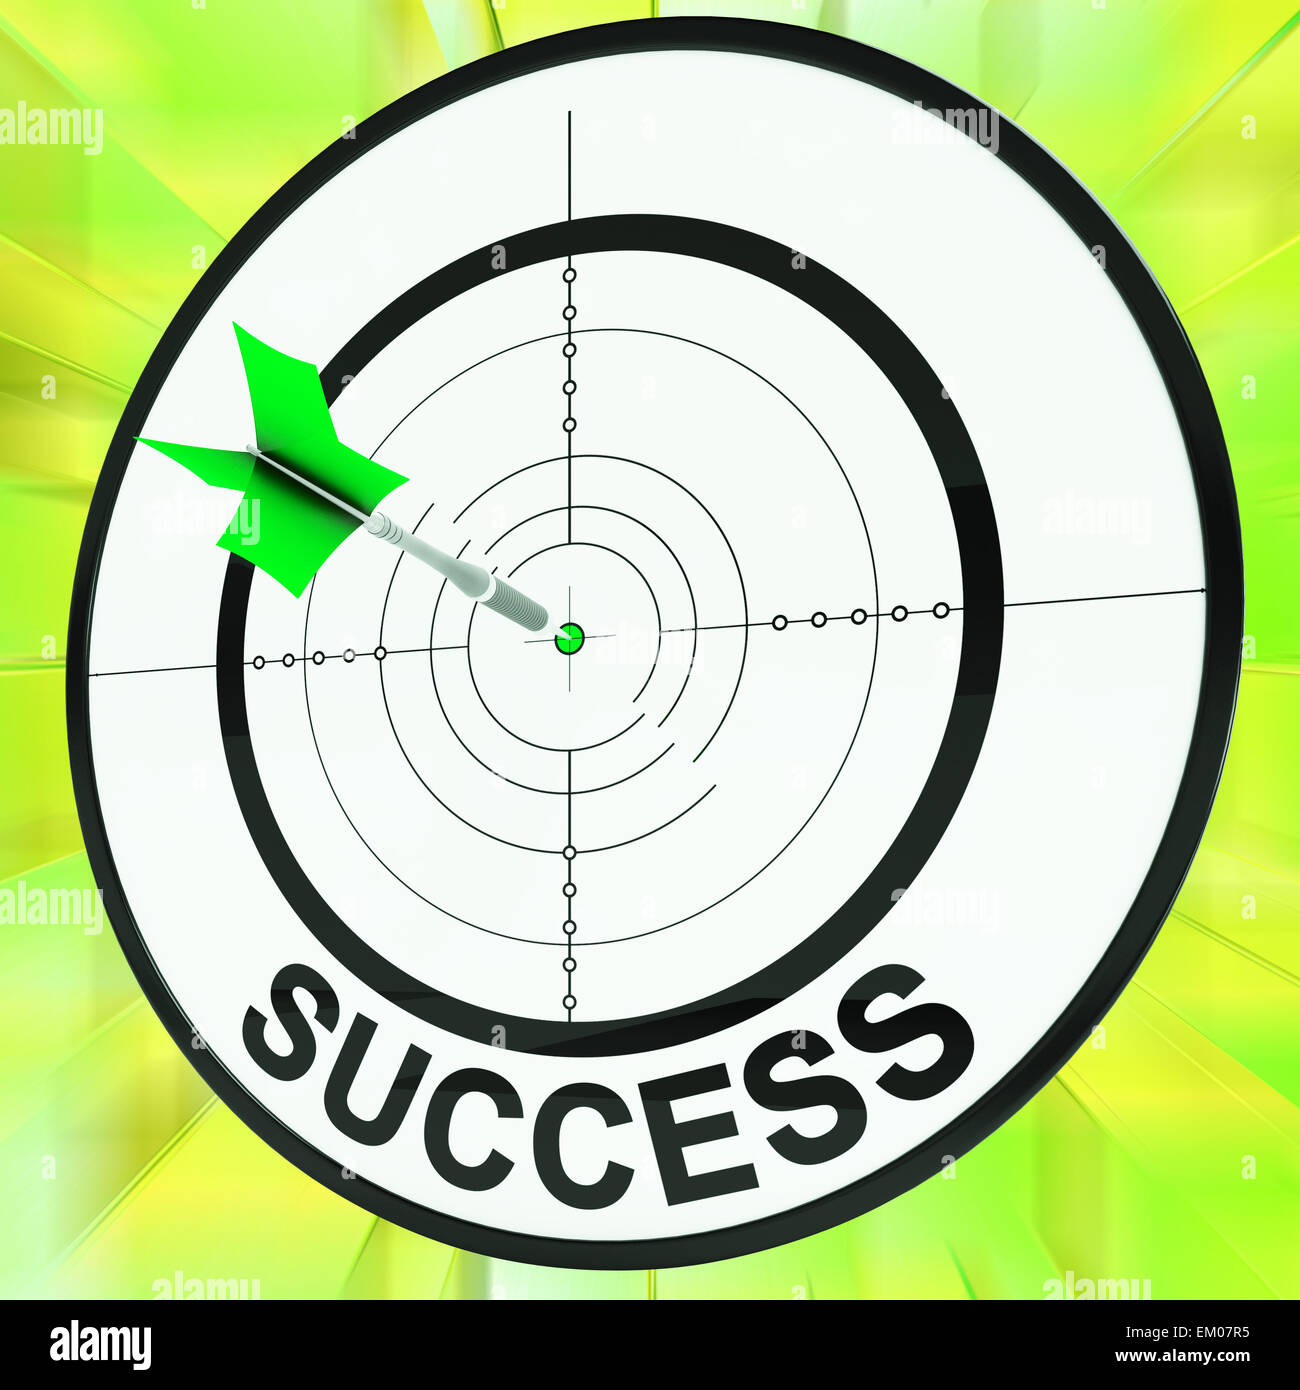 Success Target Shows Development Ideas And Vision Stock Photo